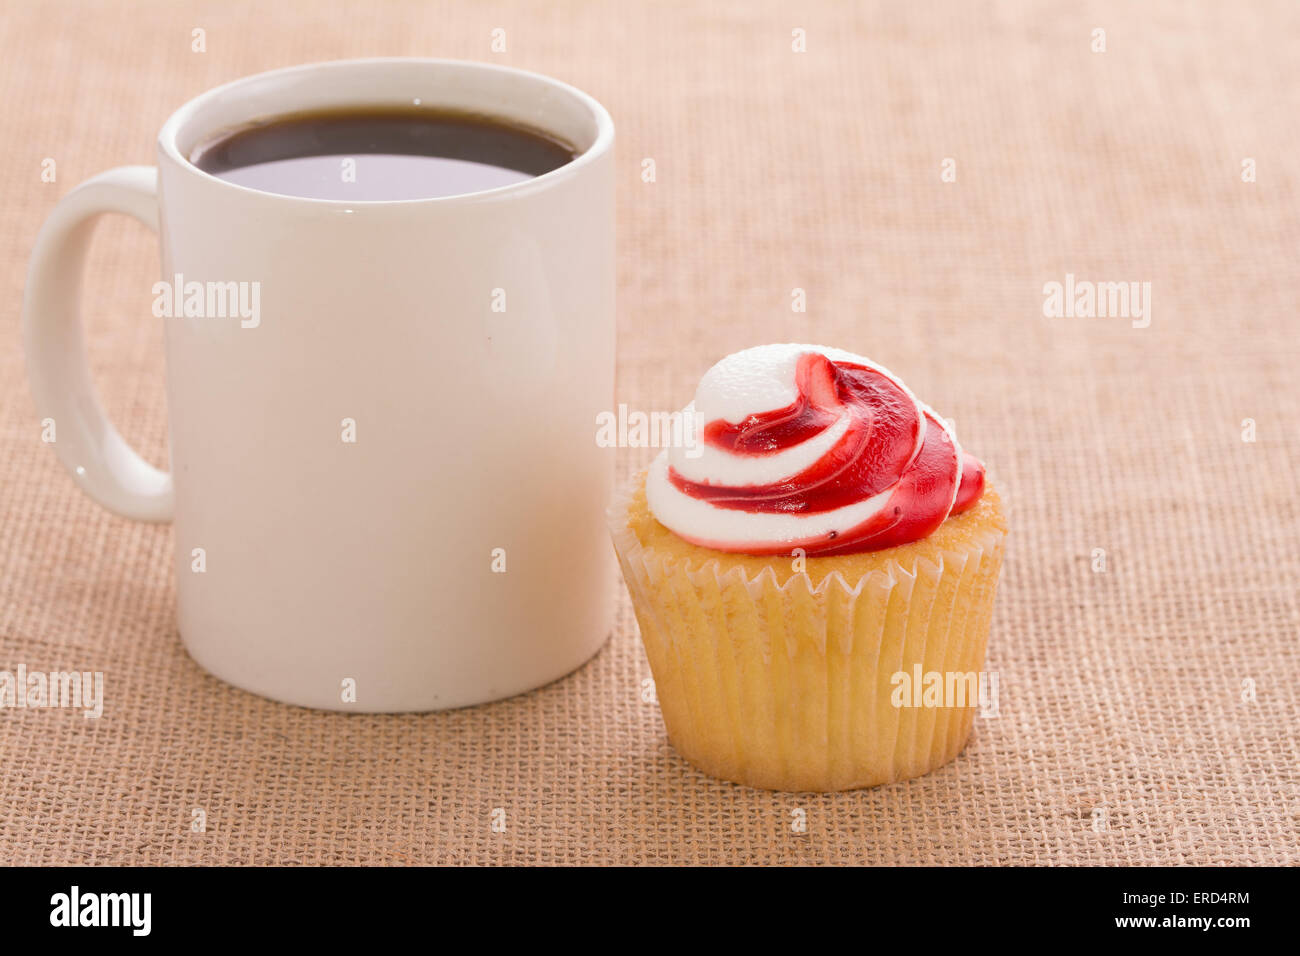 Coffee cup with a strawberry flavored cupcake, on burlap background Stock Photo